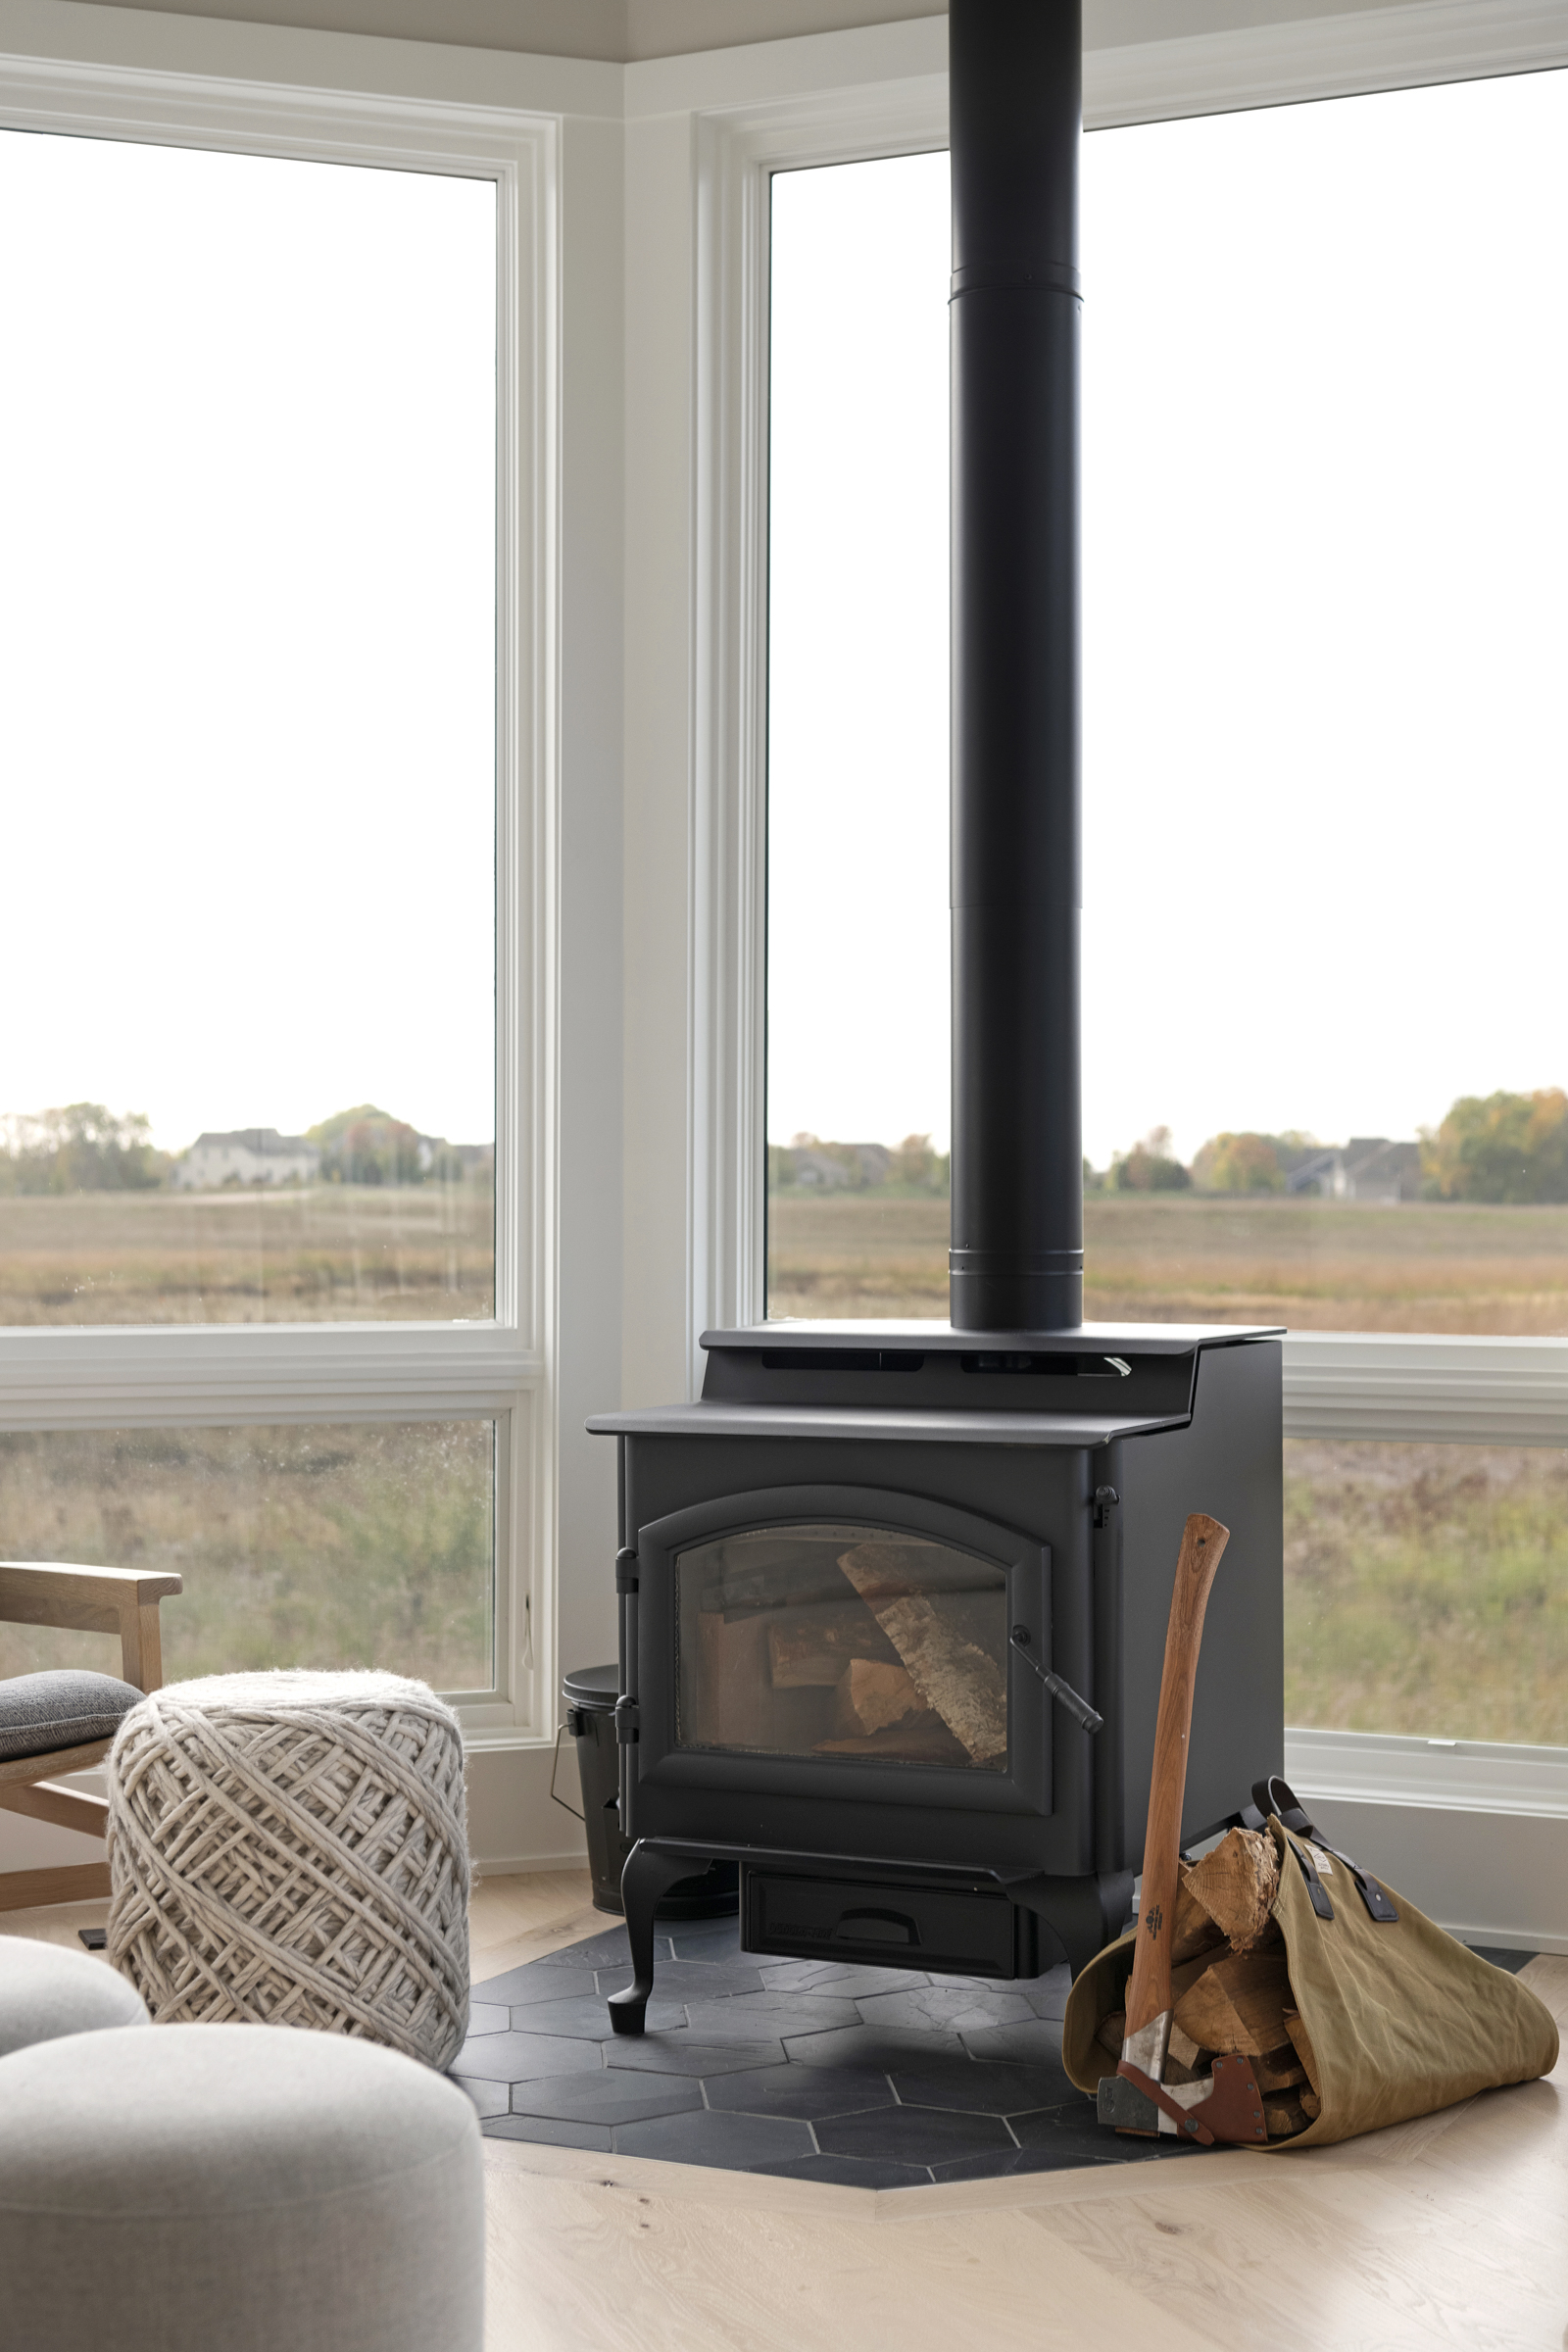 A prairie-style wood burning stove enhances the cozy ambiance of a transitional living room in a custom home.